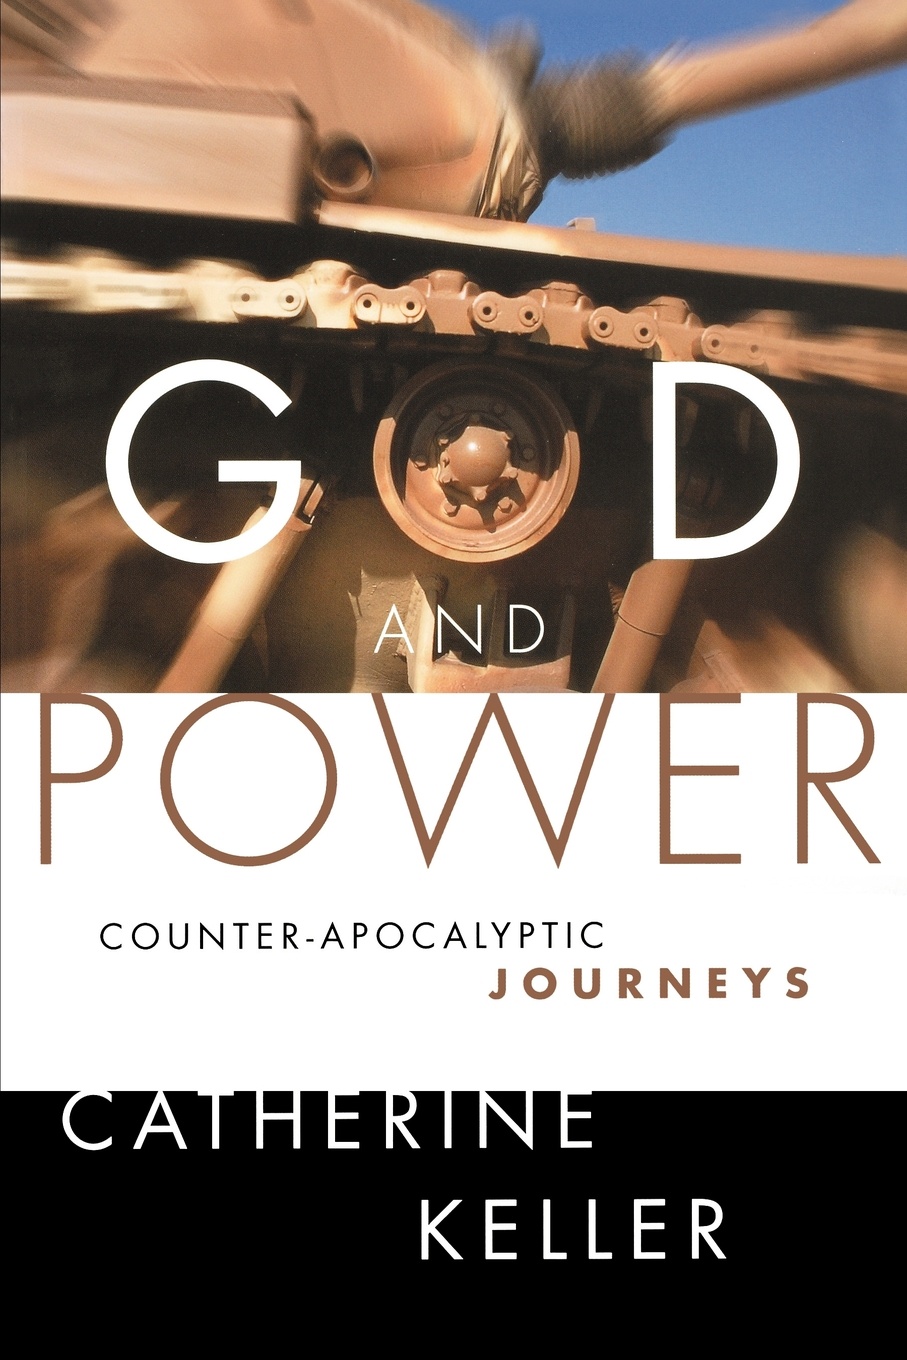 God and Power. Counter-Apocalyptic Journeys